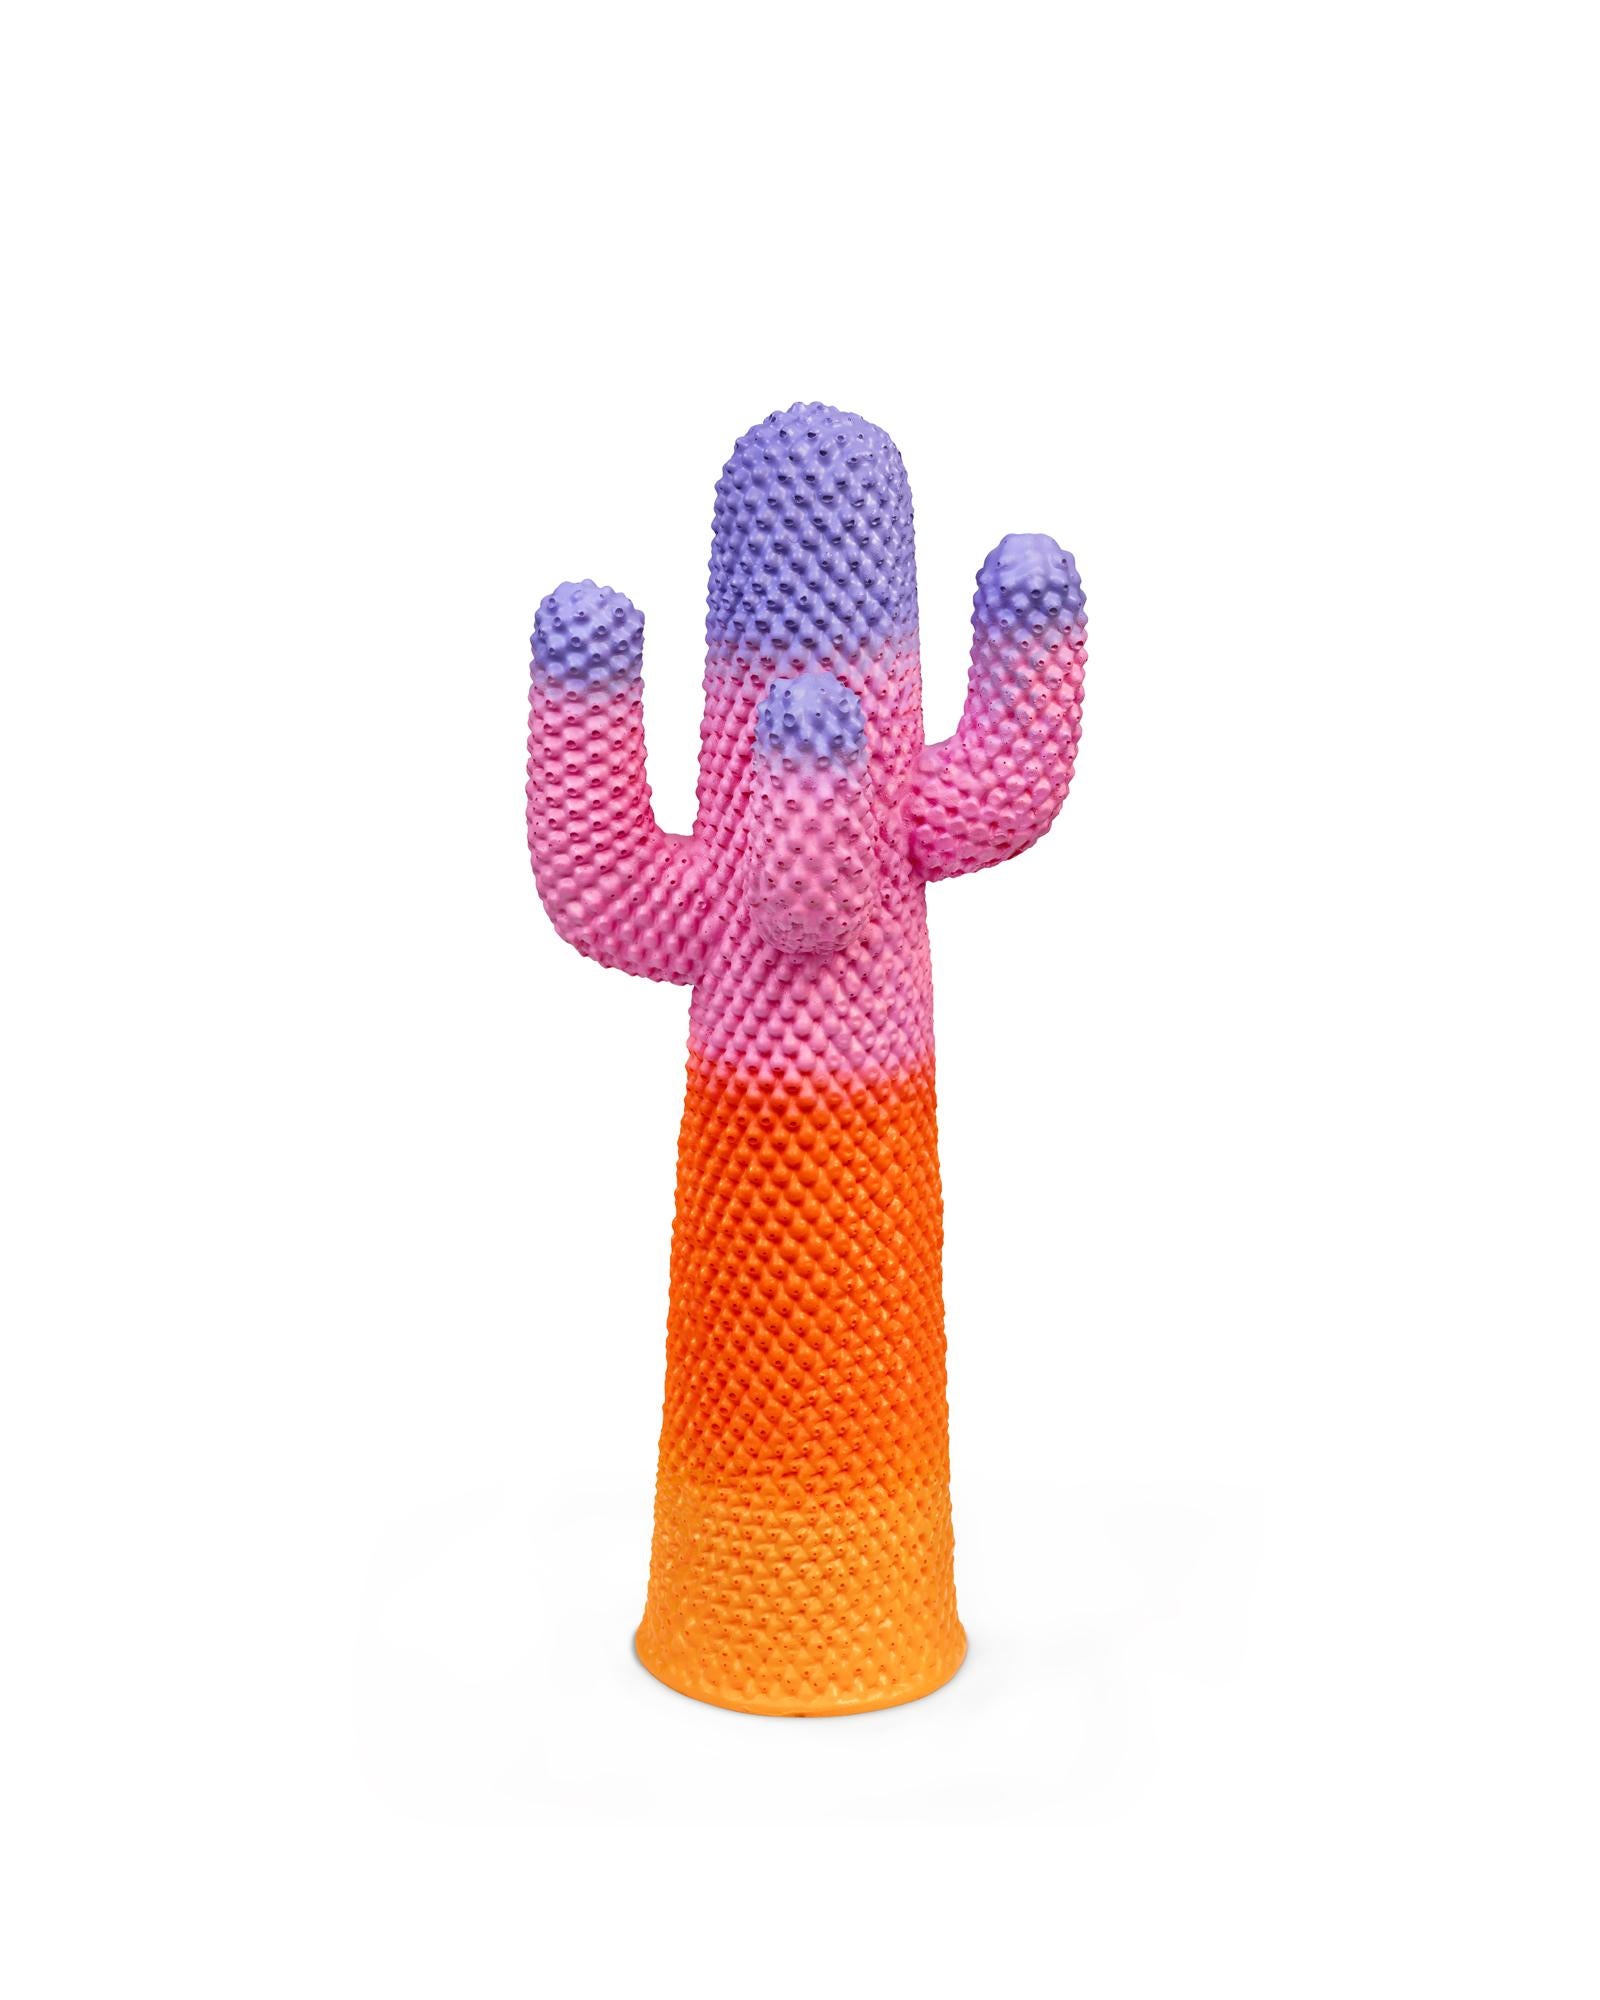 The new Guframini SUNRISE CACTUS® are the miniaturised version of the Gufram x Paul Smith SUNRISE CACTUS®: a limited edition of 600 Guframini that preserves the energetic and optimistic colour palette of the original size, typical of daybreak. As